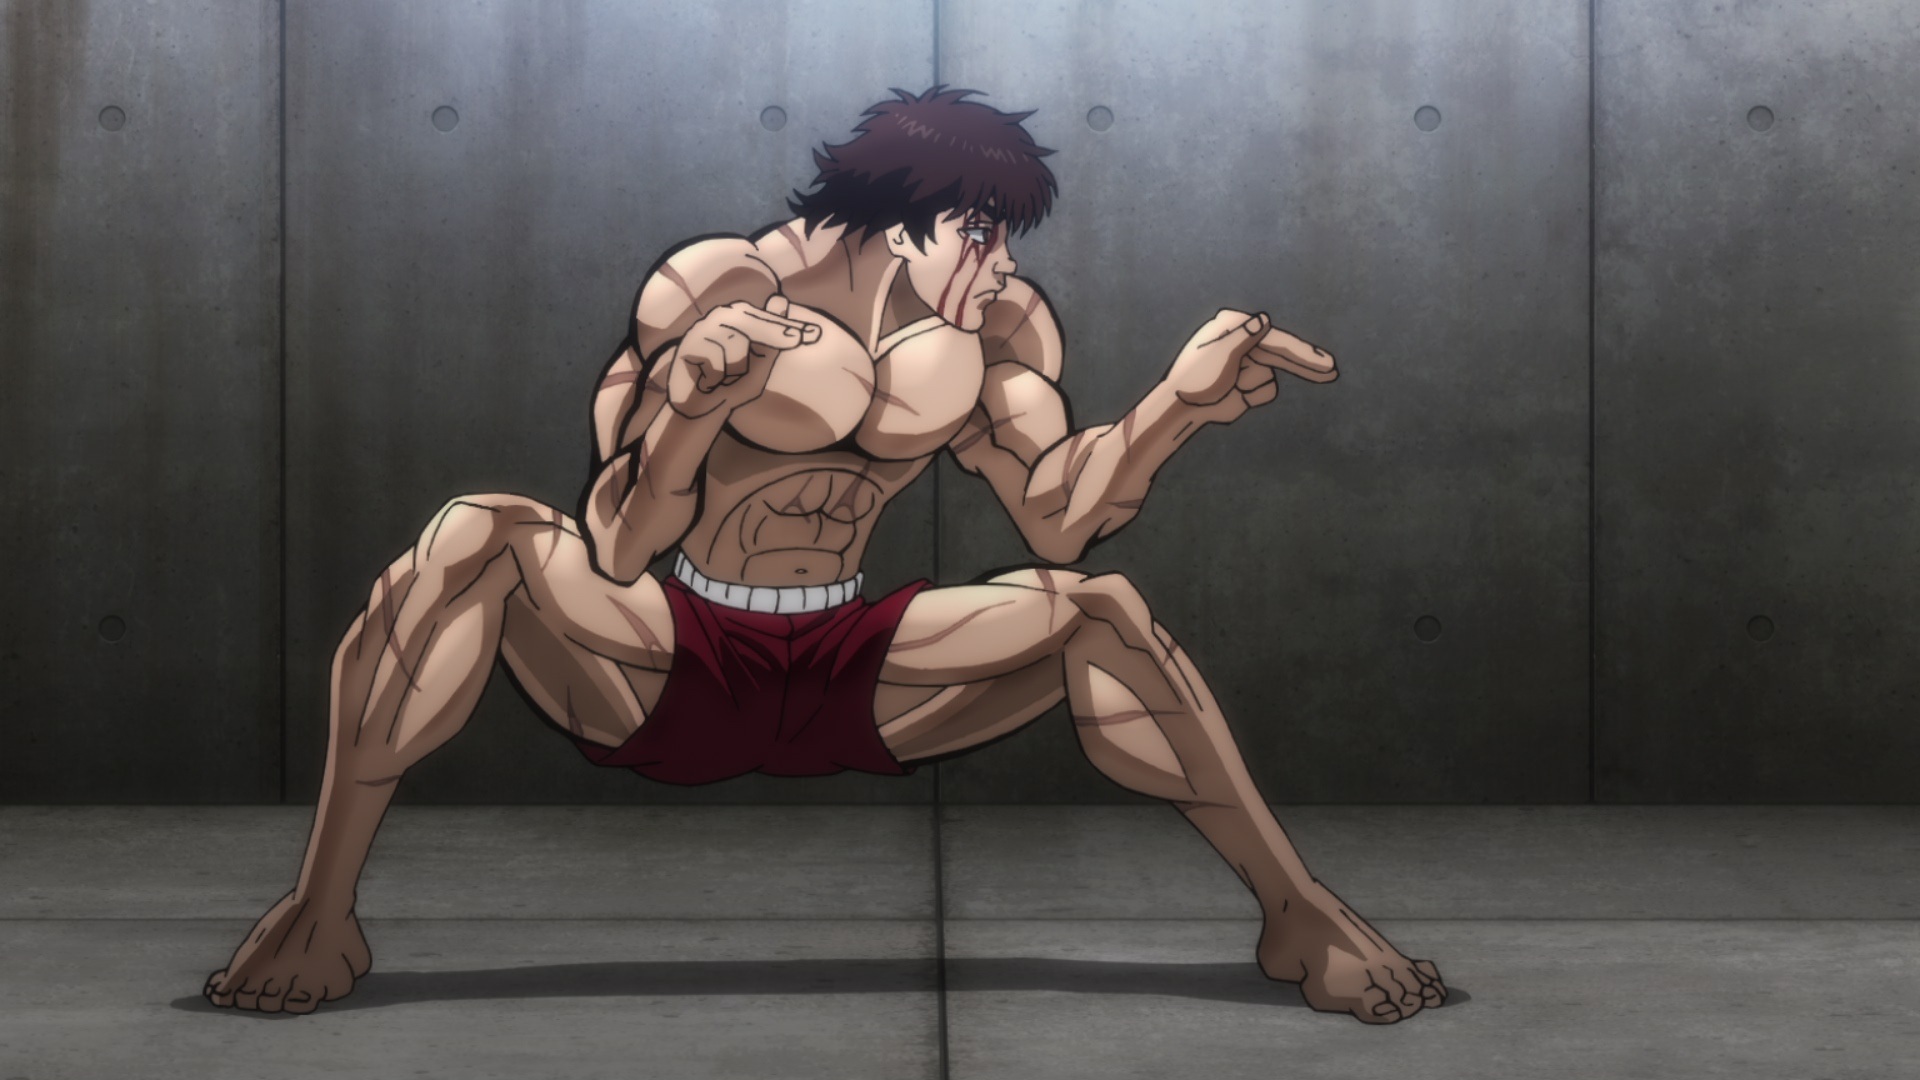 Baki Hanma' Season 2 Coming to Netflix in Two Parts in July and